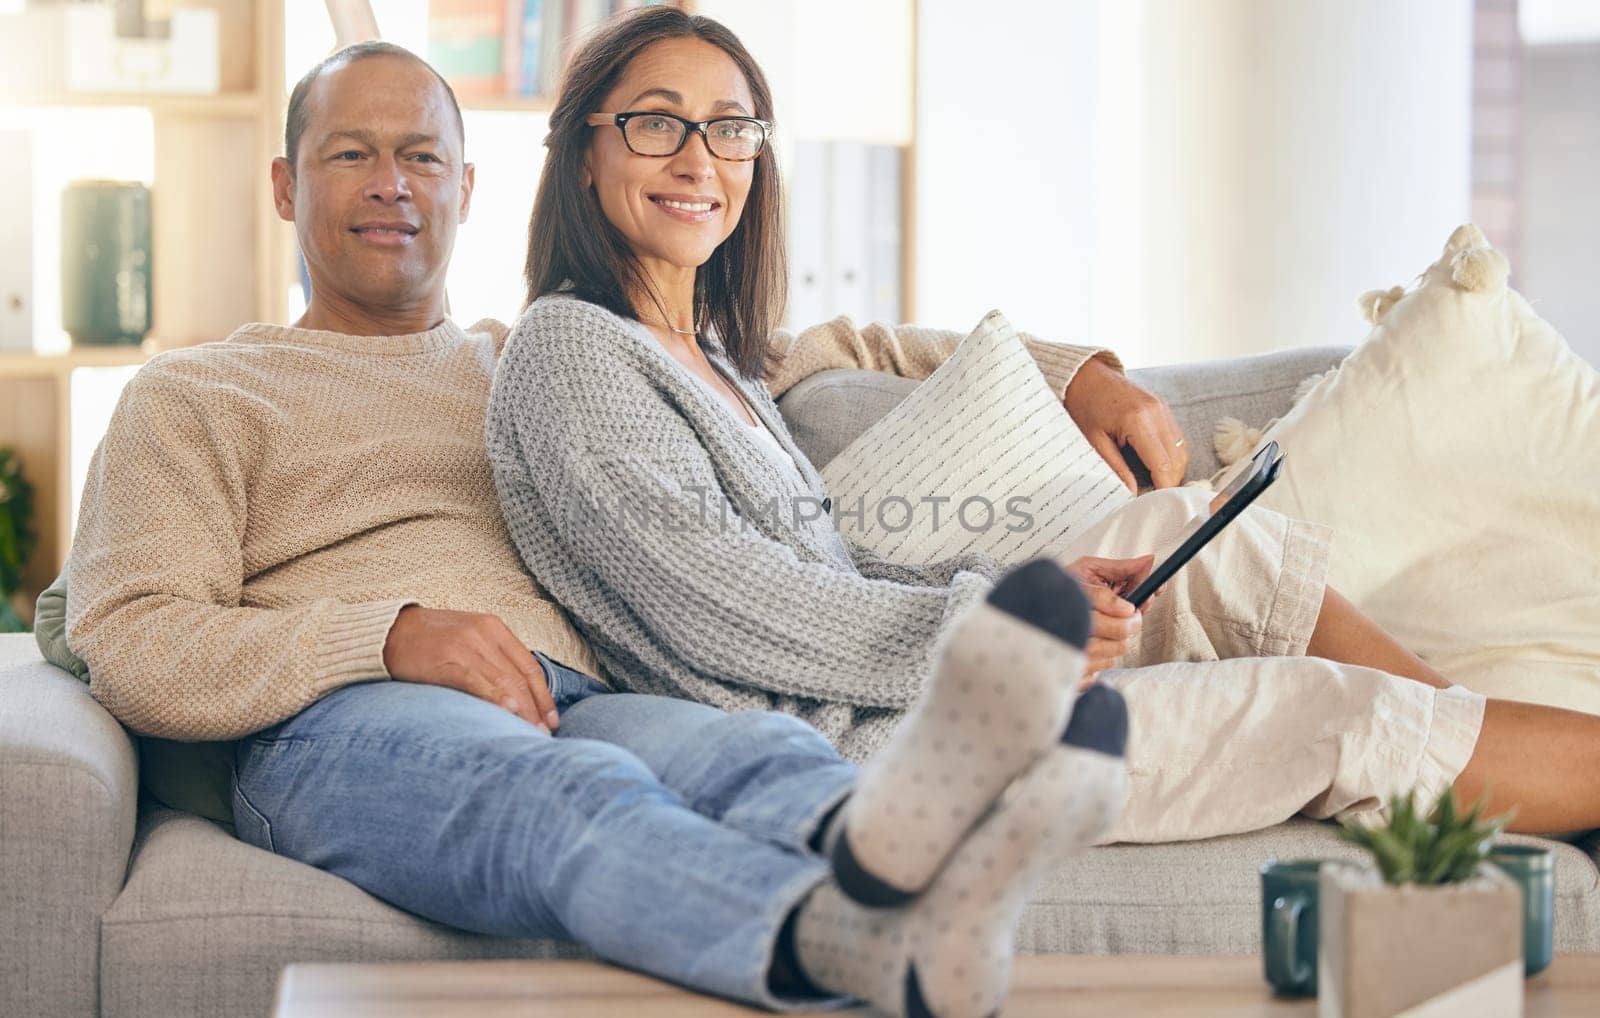 Mature couple, tablet and relax portrait on sofa together for love, support and romance bonding in living room at home. Man smile, happy woman, and romantic quality time on couch with tech device by YuriArcurs